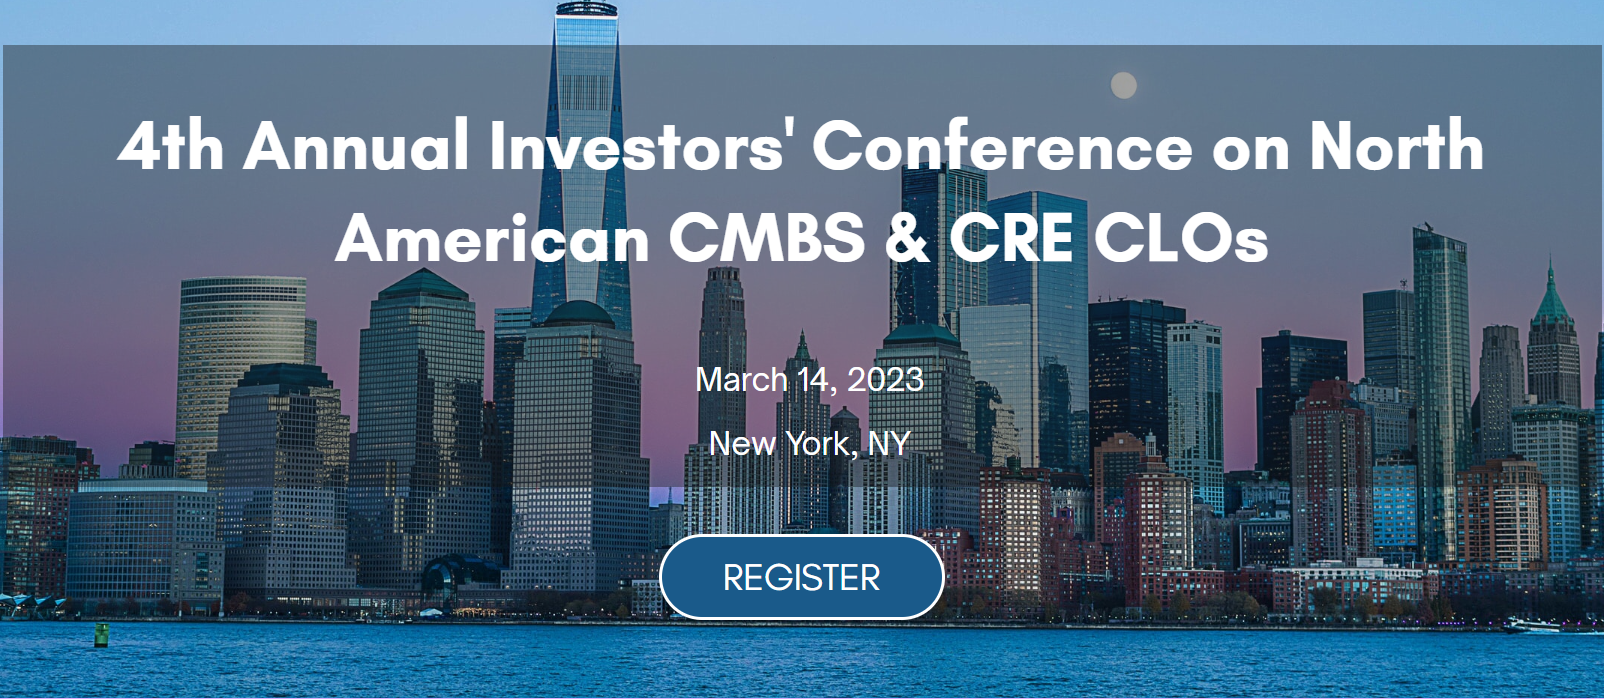 Annual Investors' Conference on North American CMBS & CRE CLOs